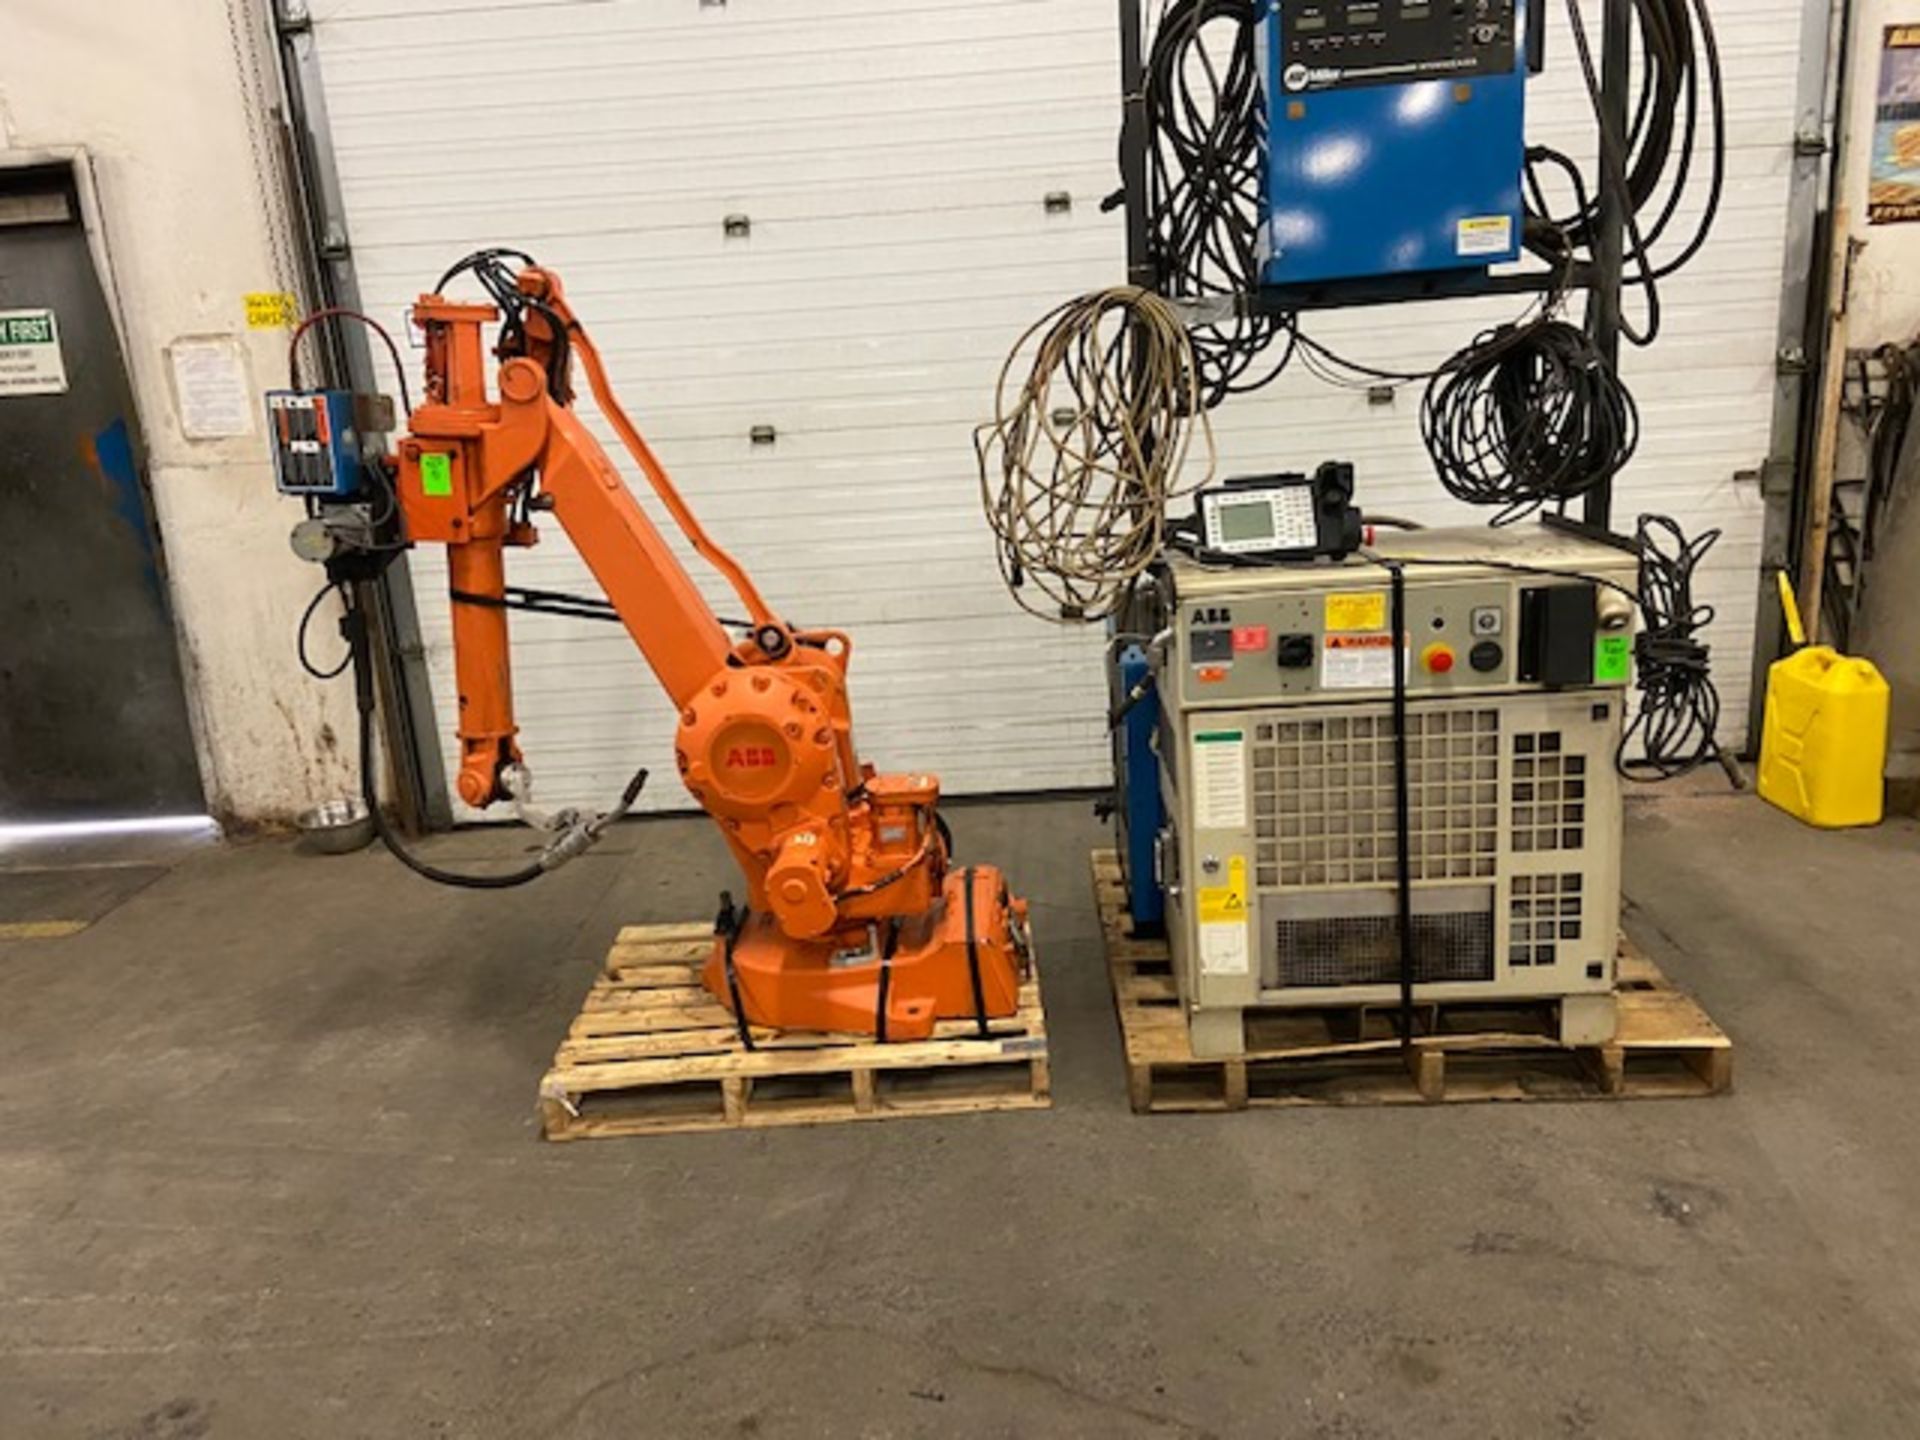 ABB IRB 2400 Robotic Weld Package w/ IRB2400 M2000 Controller, Miller Robotic Interface and Miller